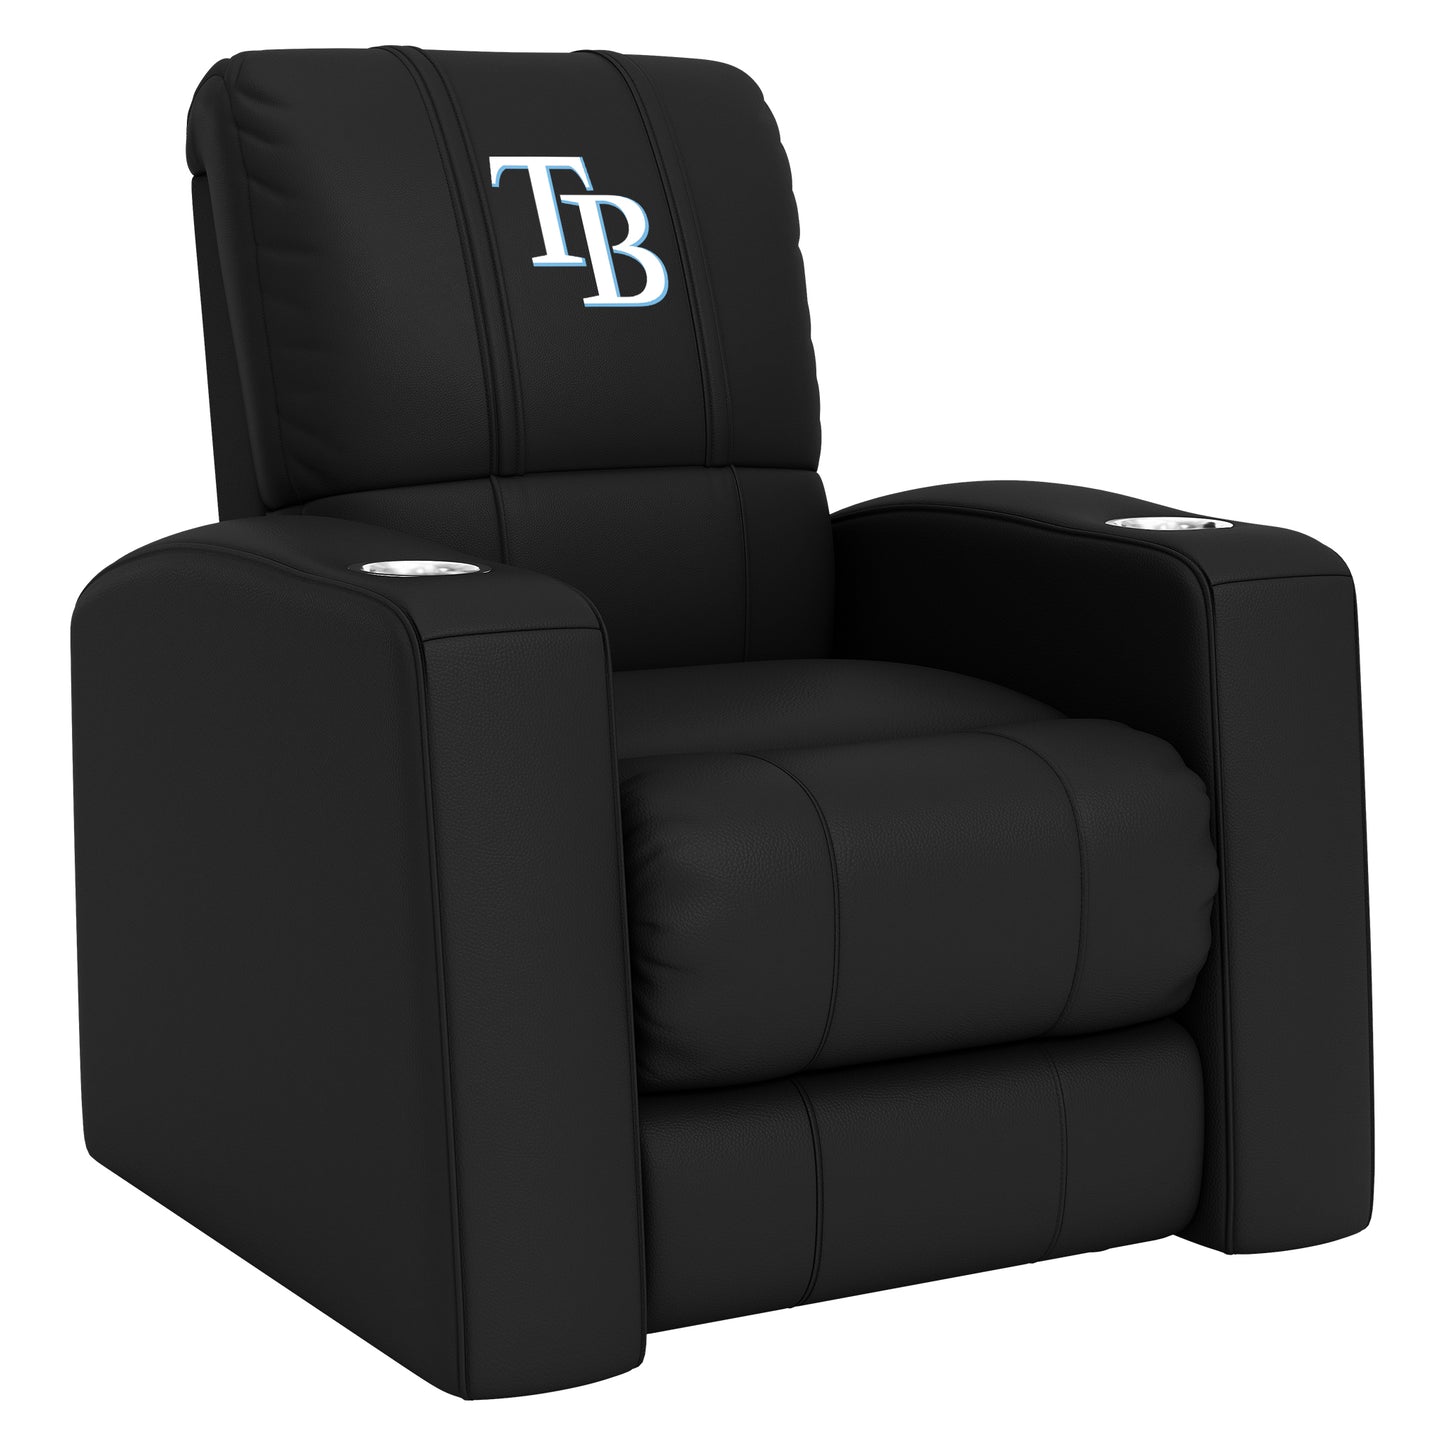 Relax Home Theater Recliner with Tampa Bay Rays Secondary